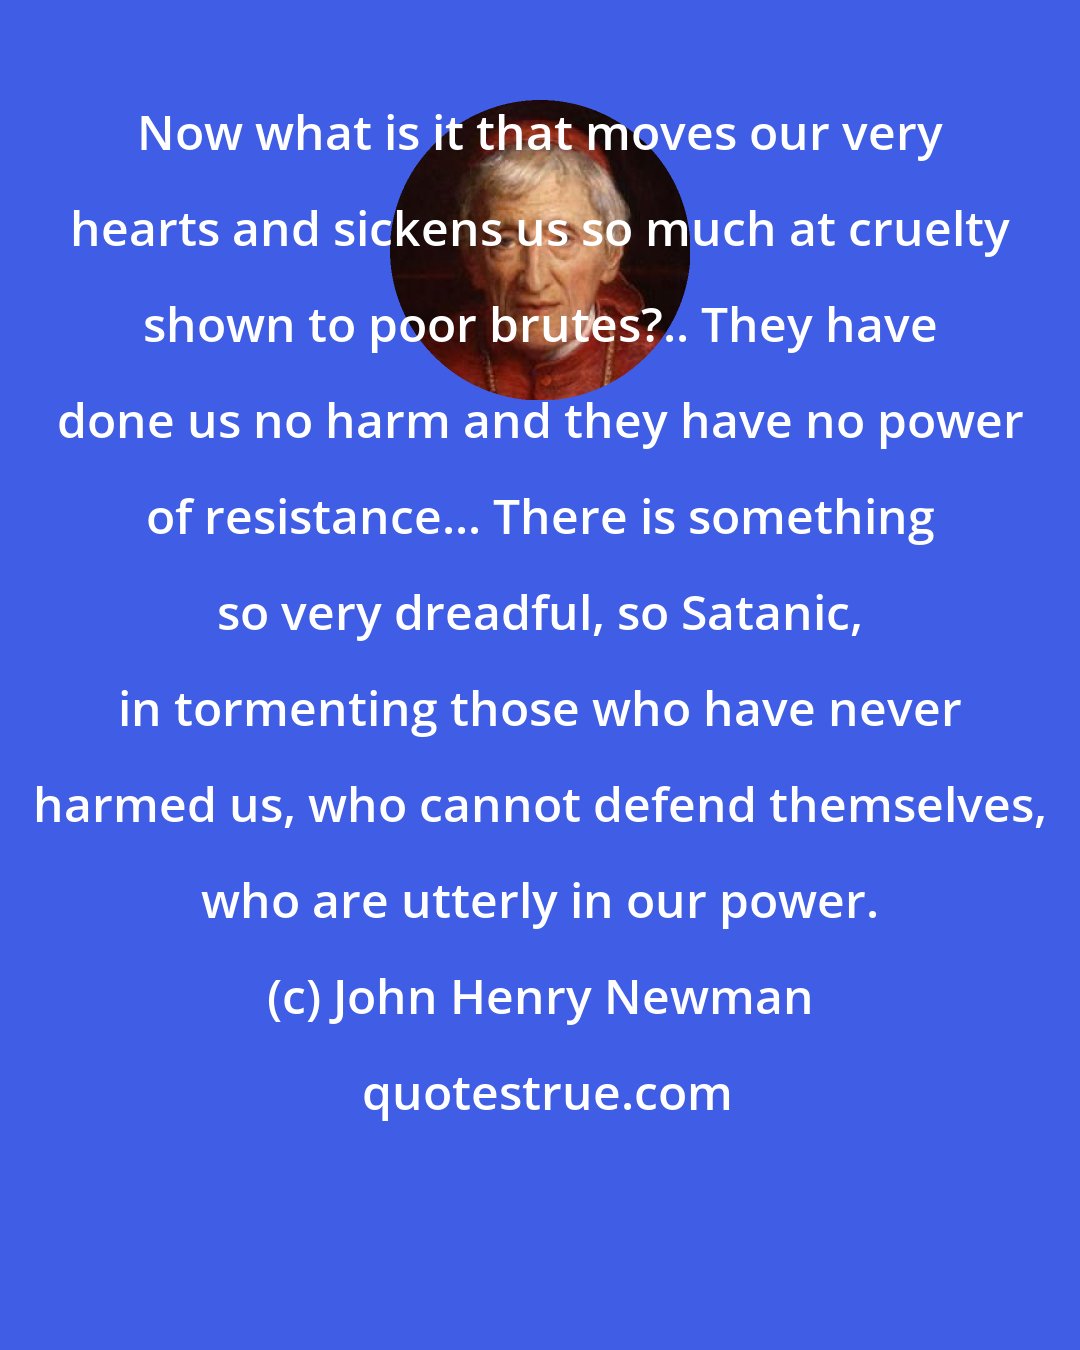 John Henry Newman: Now what is it that moves our very hearts and sickens us so much at cruelty shown to poor brutes?.. They have done us no harm and they have no power of resistance... There is something so very dreadful, so Satanic, in tormenting those who have never harmed us, who cannot defend themselves, who are utterly in our power.